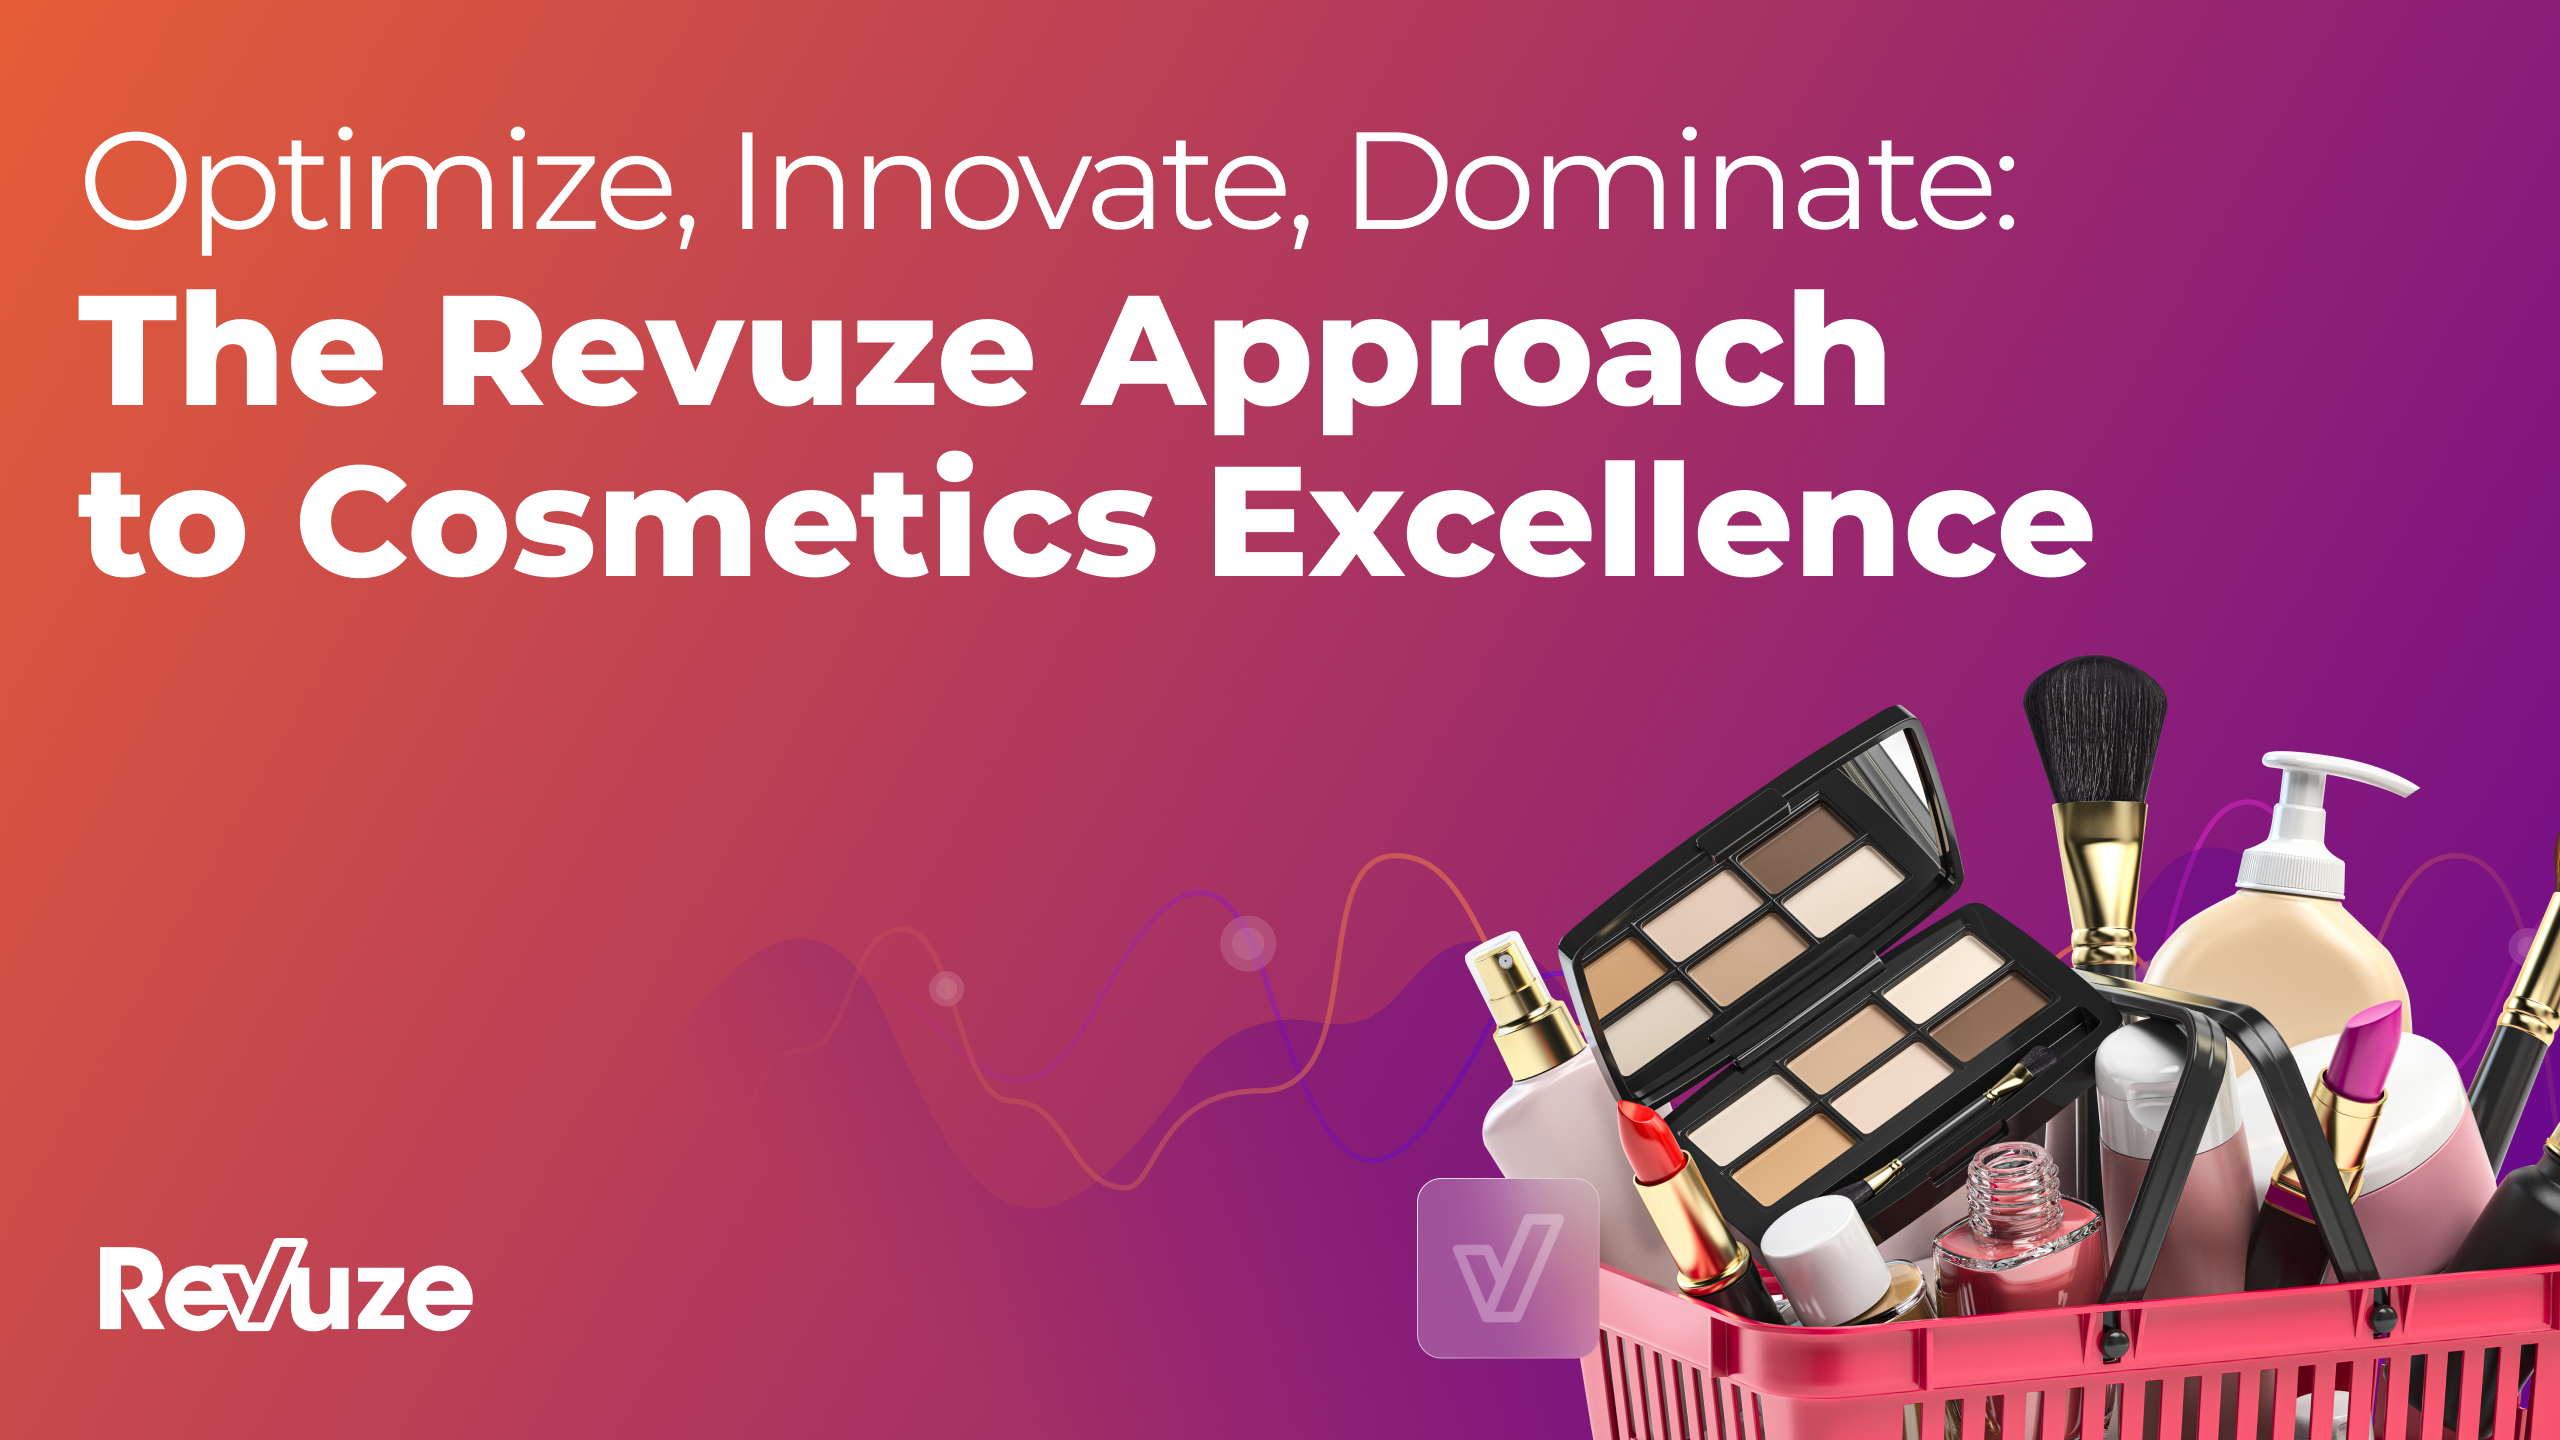 Optimize, Innovate, Dominate: The Revuze Approach to Cosmetics Excellence